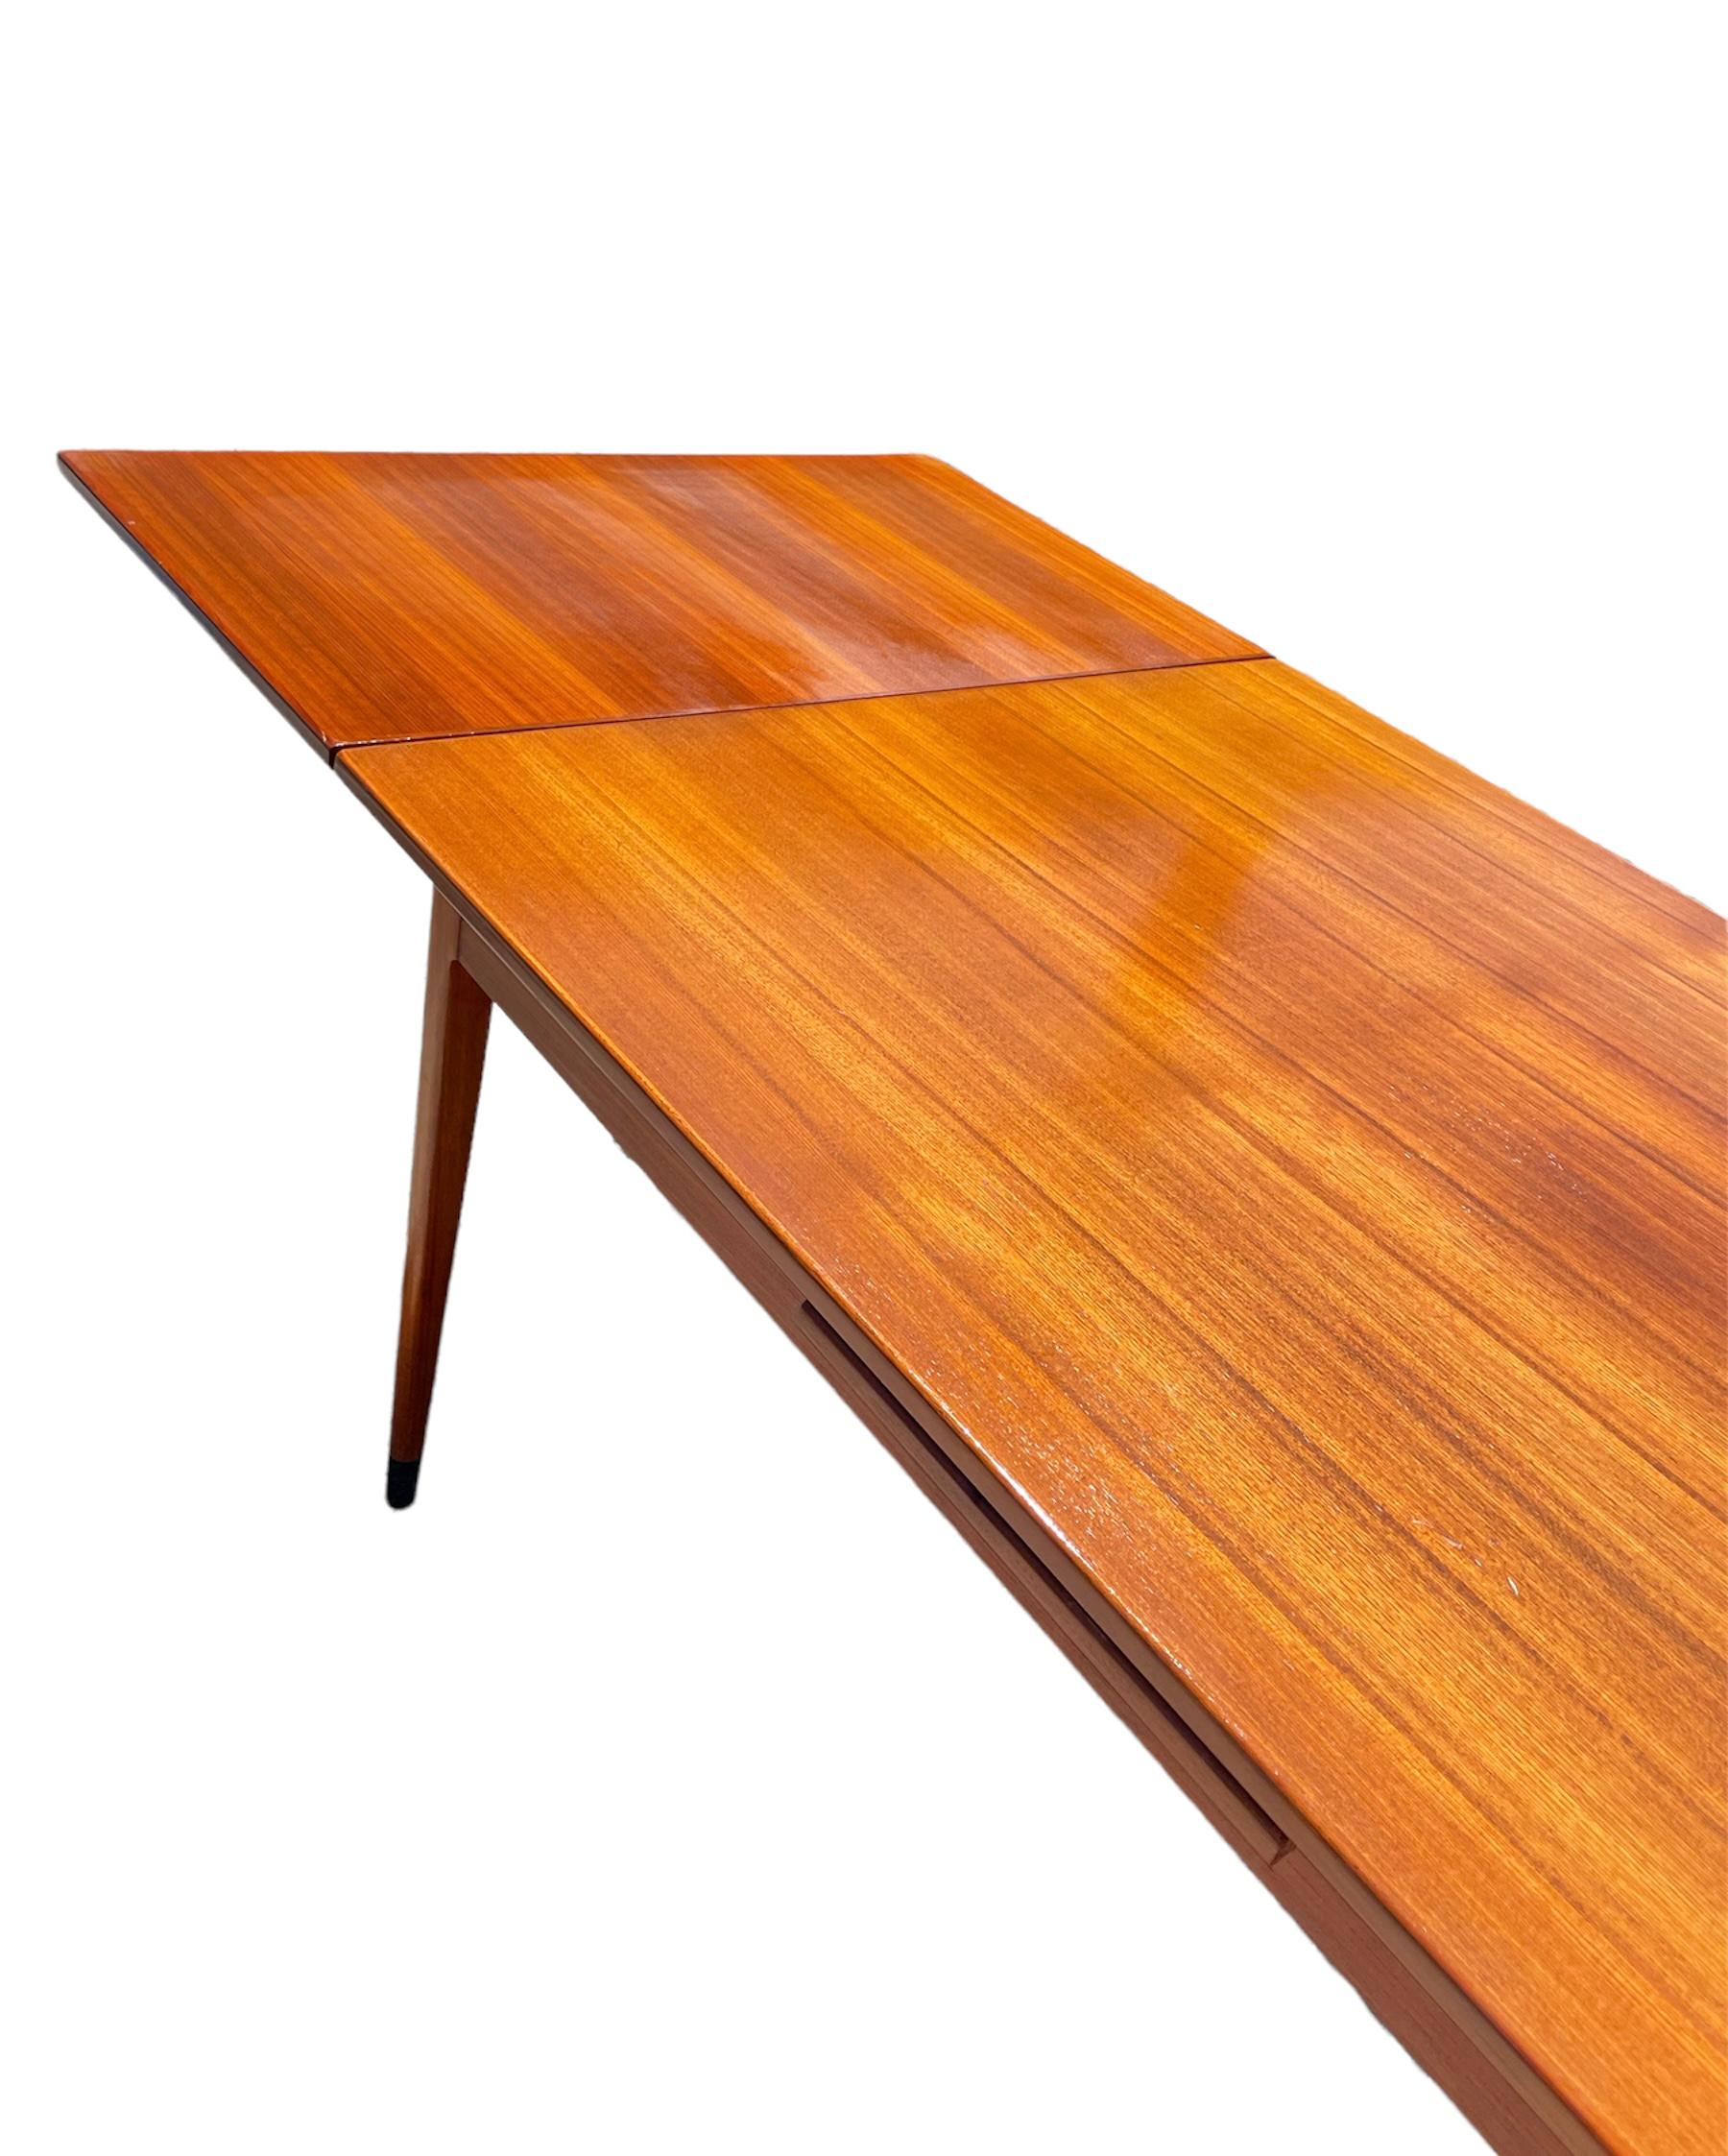 JL Niels Moller Extendable Teak Dining Table with Original Invoice 1964, No. 9C 2